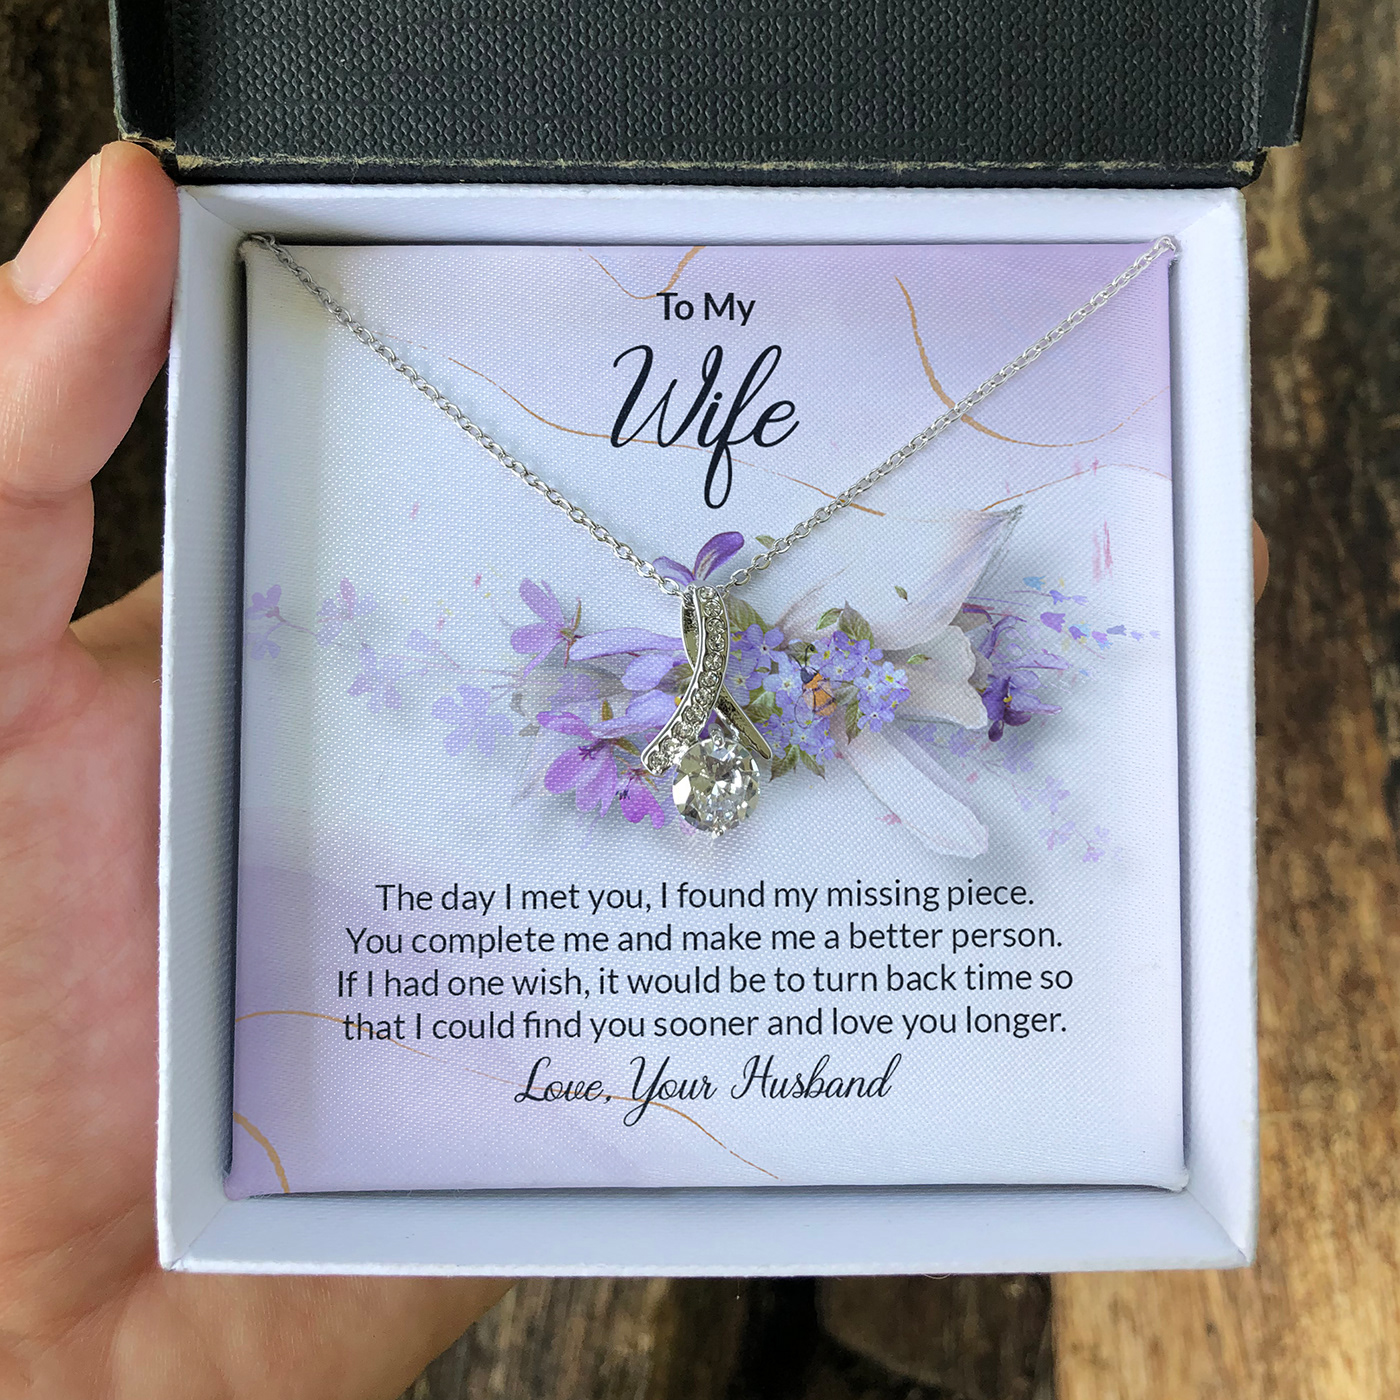 emotional quotes husband husband to wife message card design SHINEON   Shineon Necklace TO MY WIFE wife wife necklace